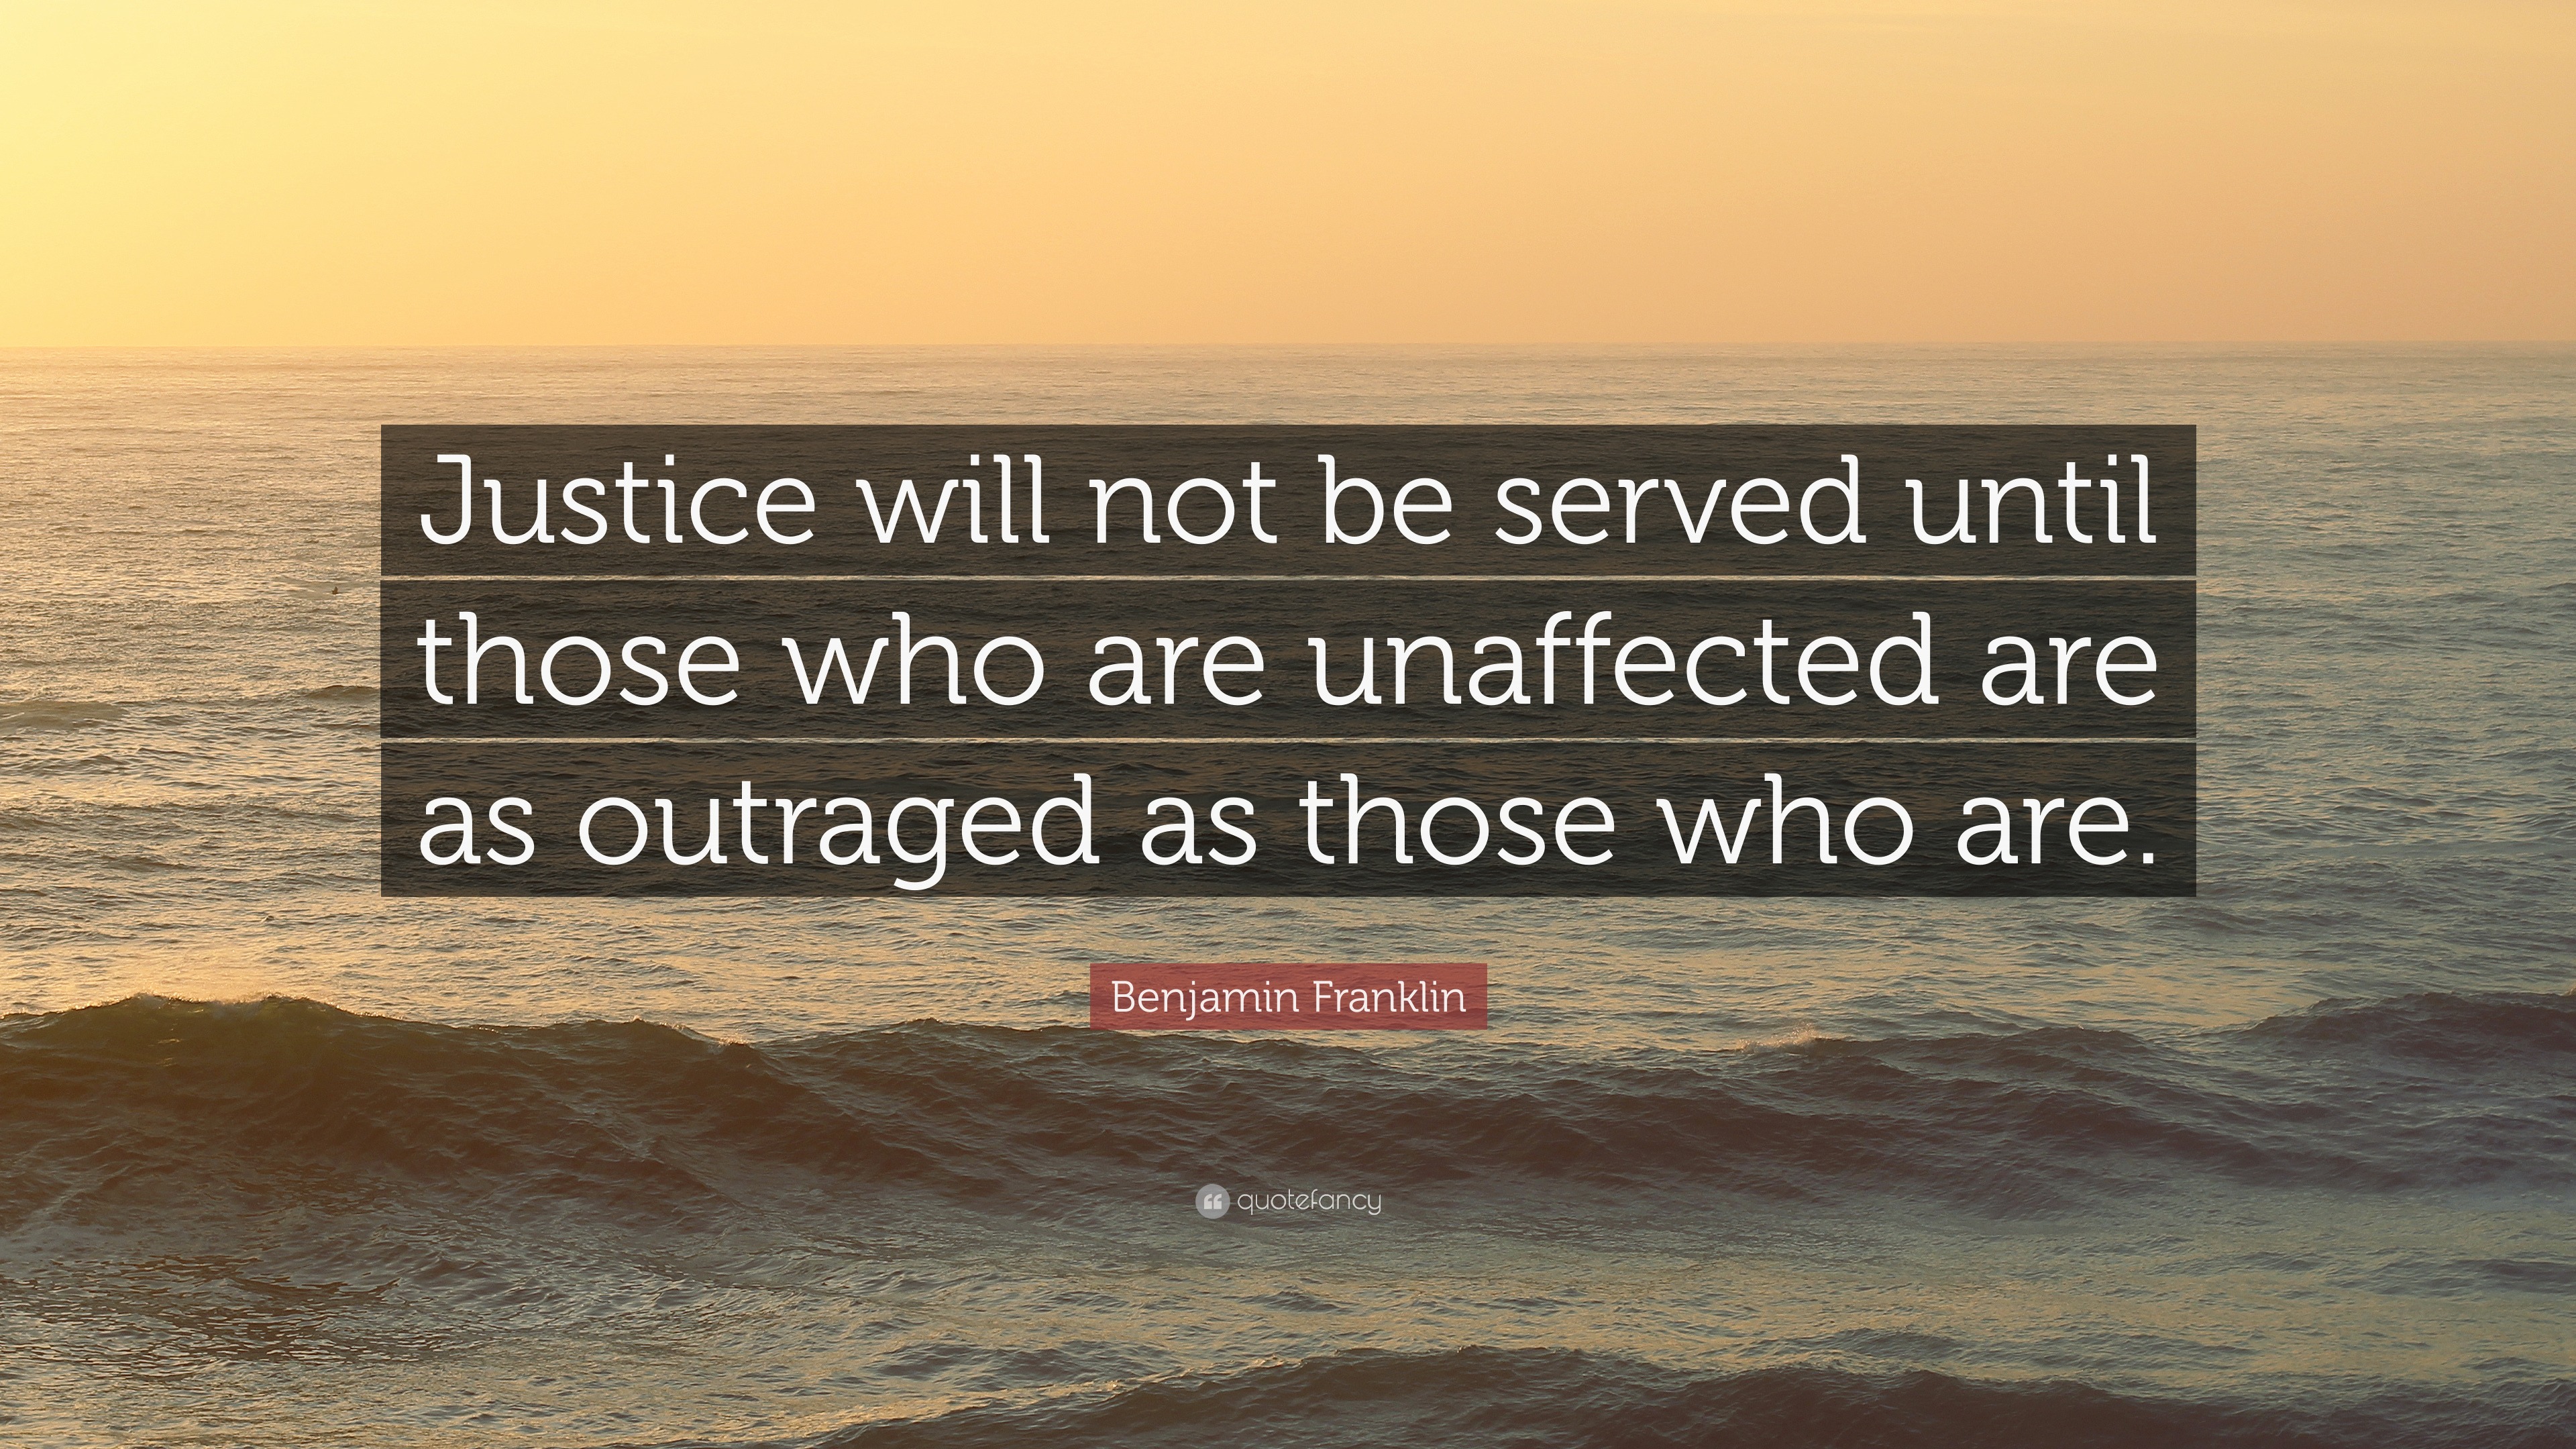 Benjamin Franklin Quote “Justice will not be served until